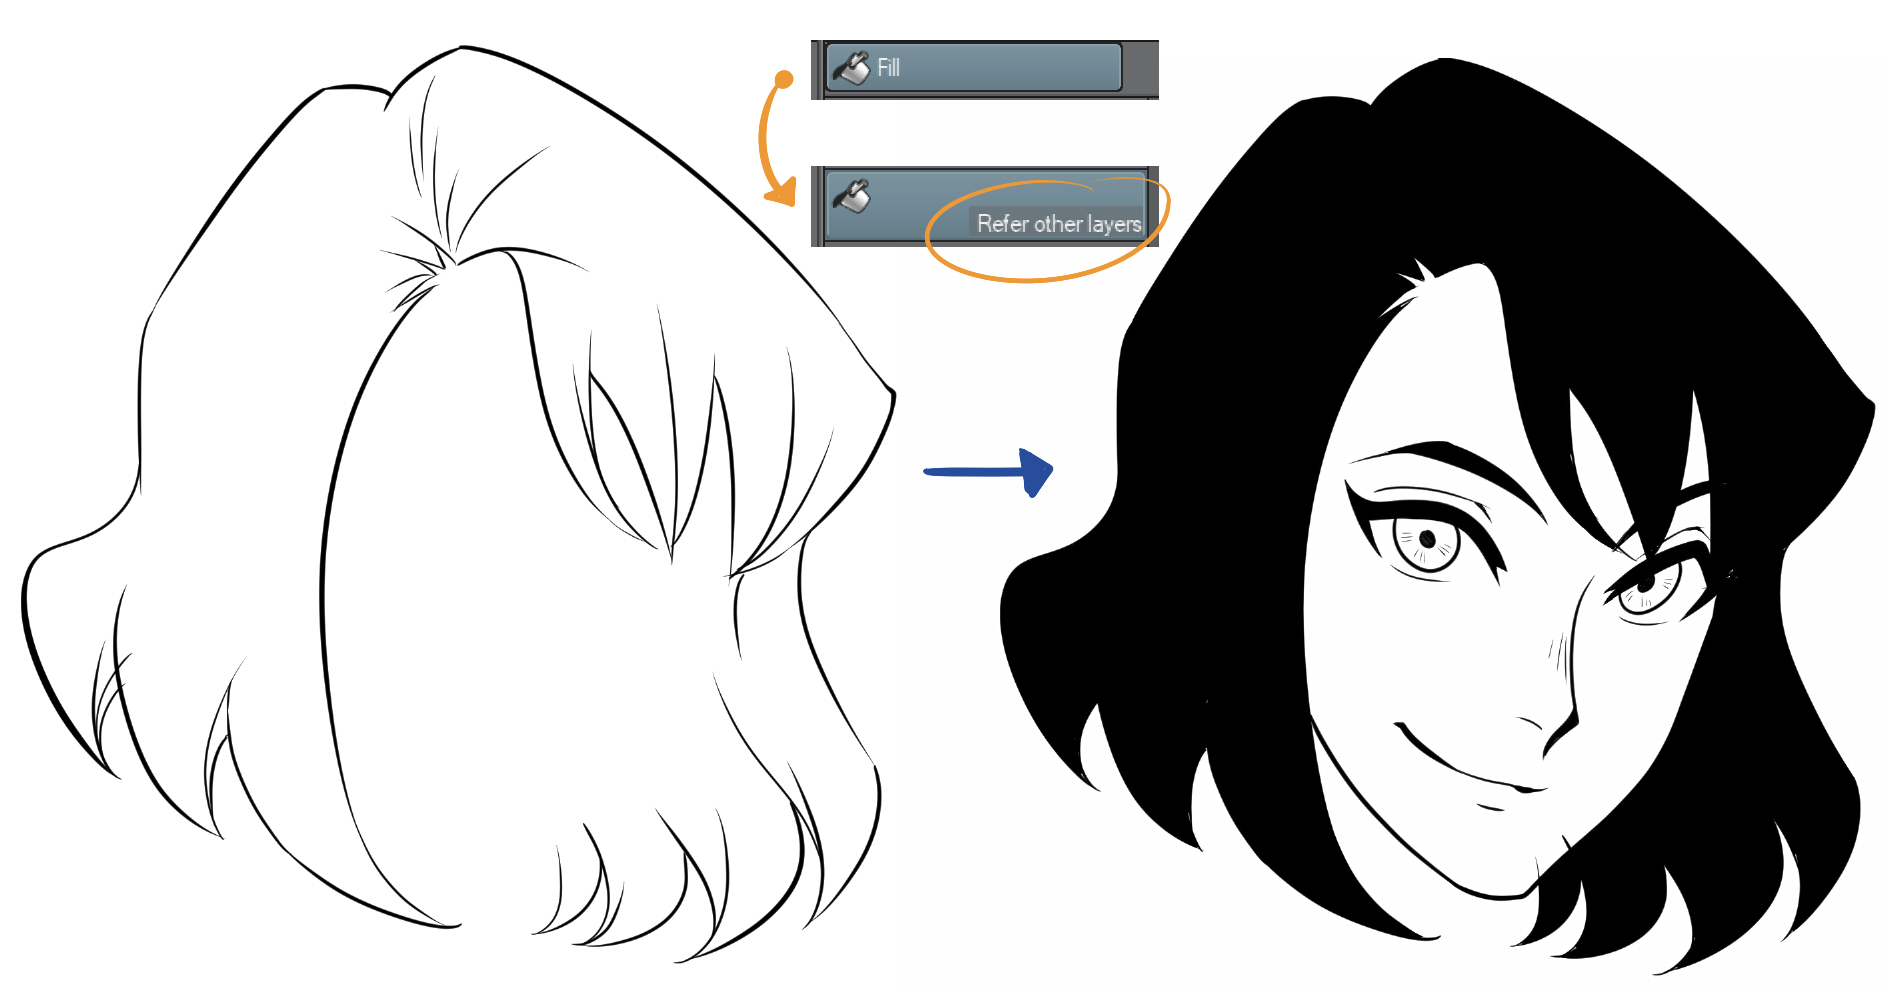 Refer other layers of the Fill tool to take into account the other visible layers in your drawing in Clip Studio Paint.